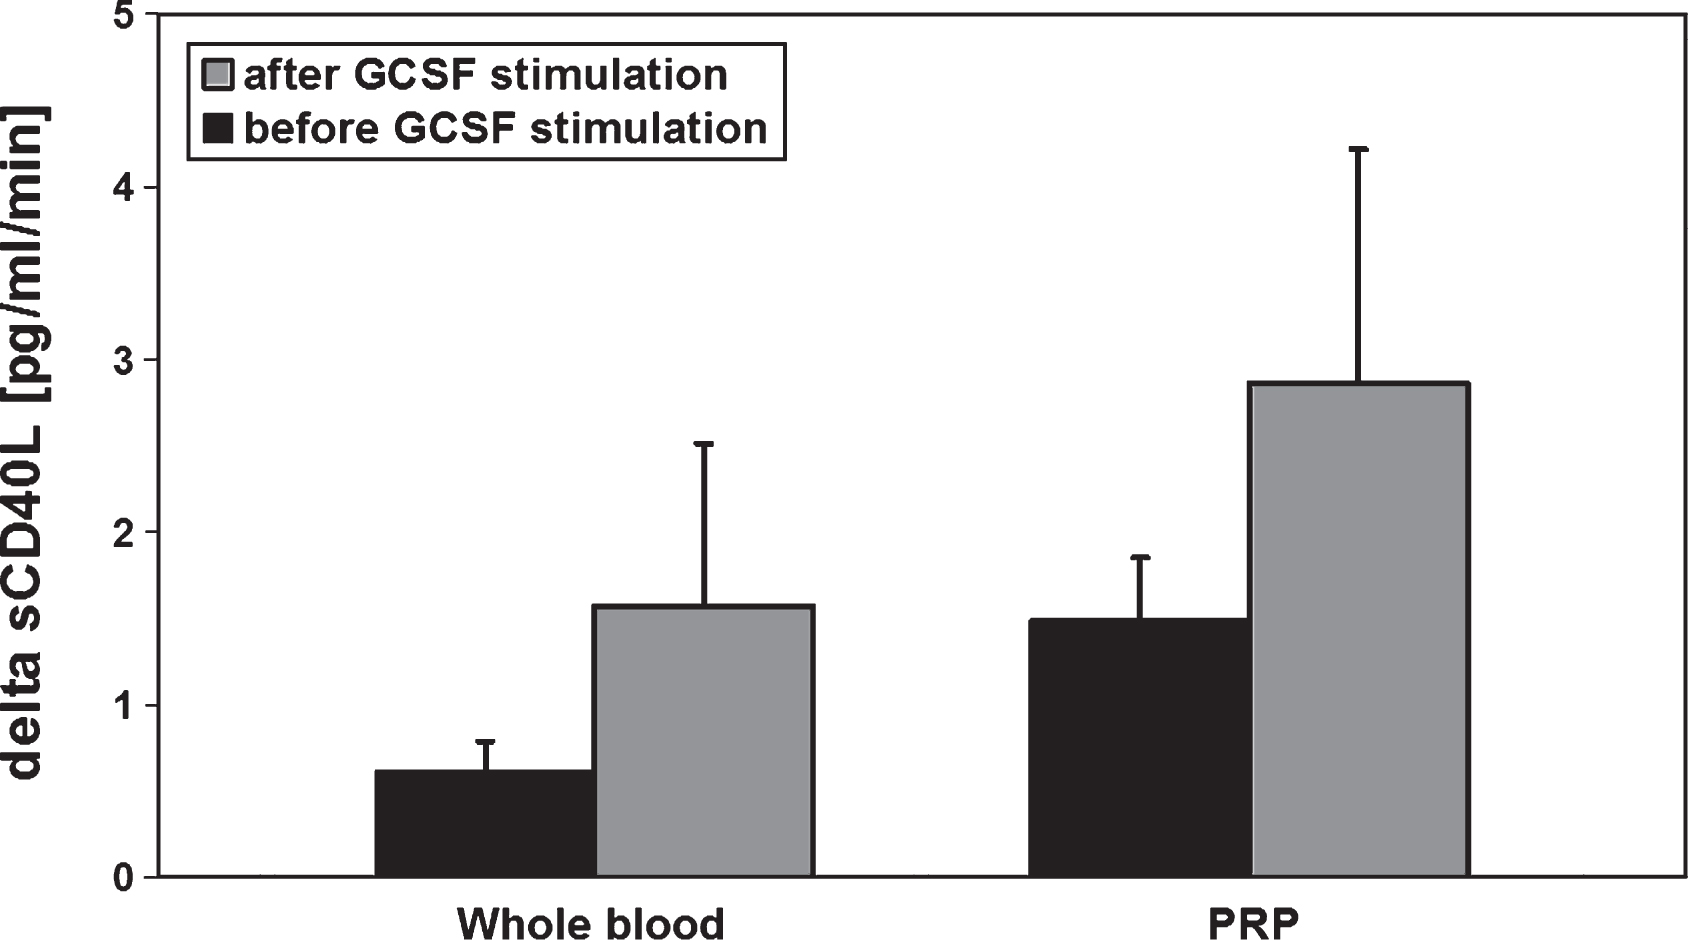 sCD40L release kinetic determined from whole blood and platelet rich plasma (PRP) of healthy allogenic PBSC donors (n = 6) before and after GCSF stimulation(5d, 10 μg/kg BW). The blood samples were incubated for 60 min at 37°C. Data are given as mean value±SEM, *p < 0,05, Mann-Whitney-Test.